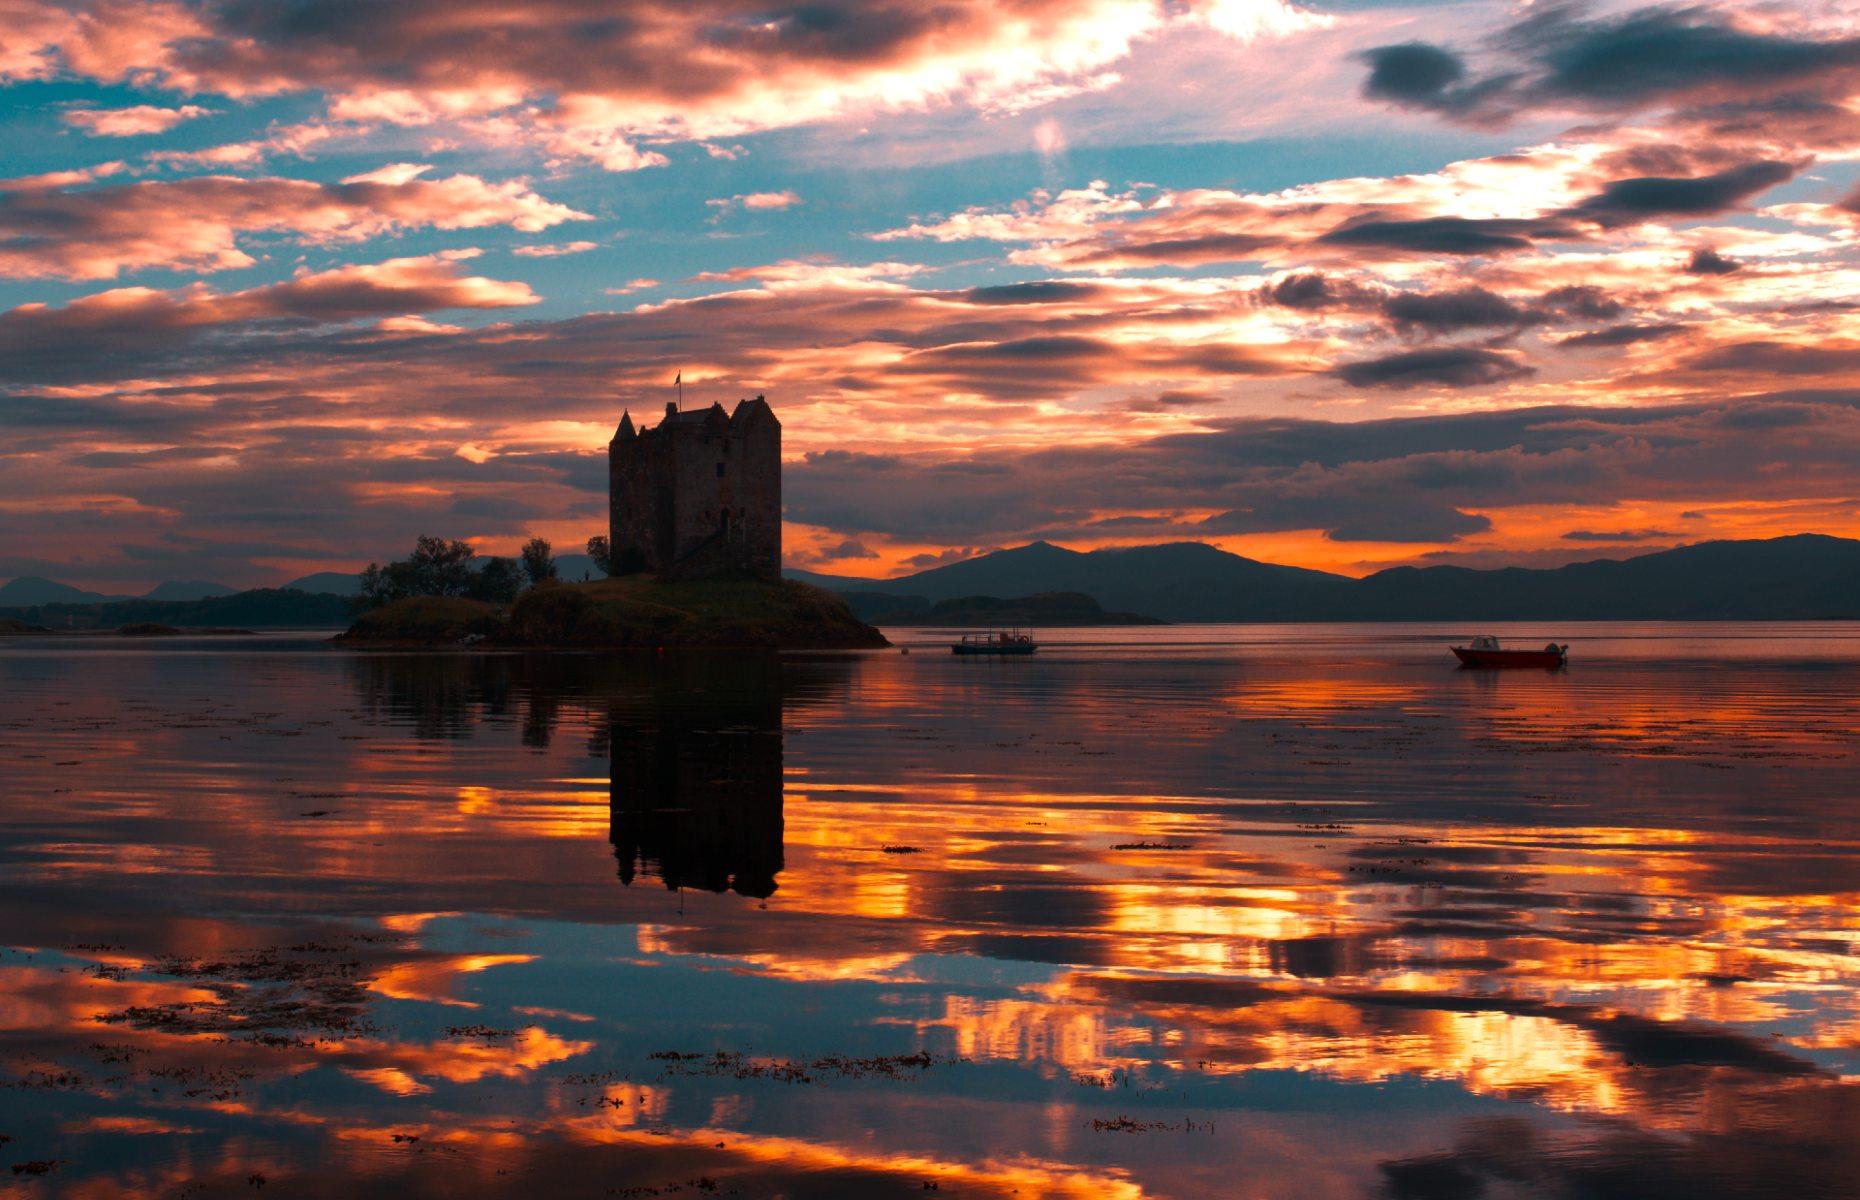 Located on its own tiny island in the middle of Loch Laich, Castle Stalker is a 14th-century fortress which has borne witness to many things over the centuries, including feuds, murder and bloody battles. But it looks ultra tranquil in this glorious shot by Dominic Ellet, in which the ruins form a striking silhouette against brightly-coloured clouds at sunset.